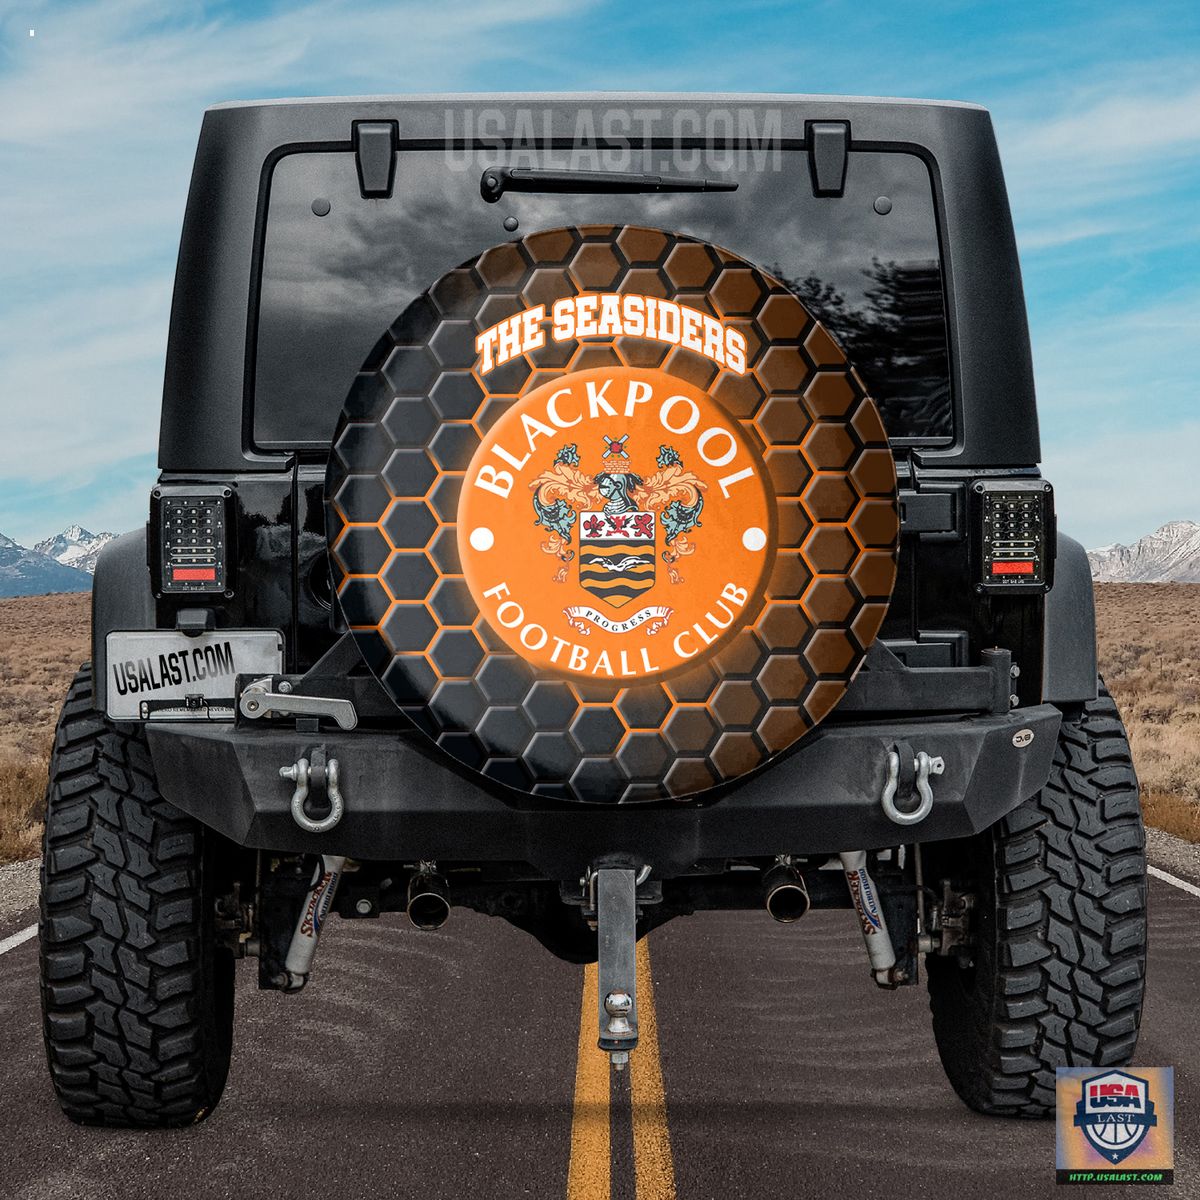 AMAZING Blackpool FC Spare Tire Cover